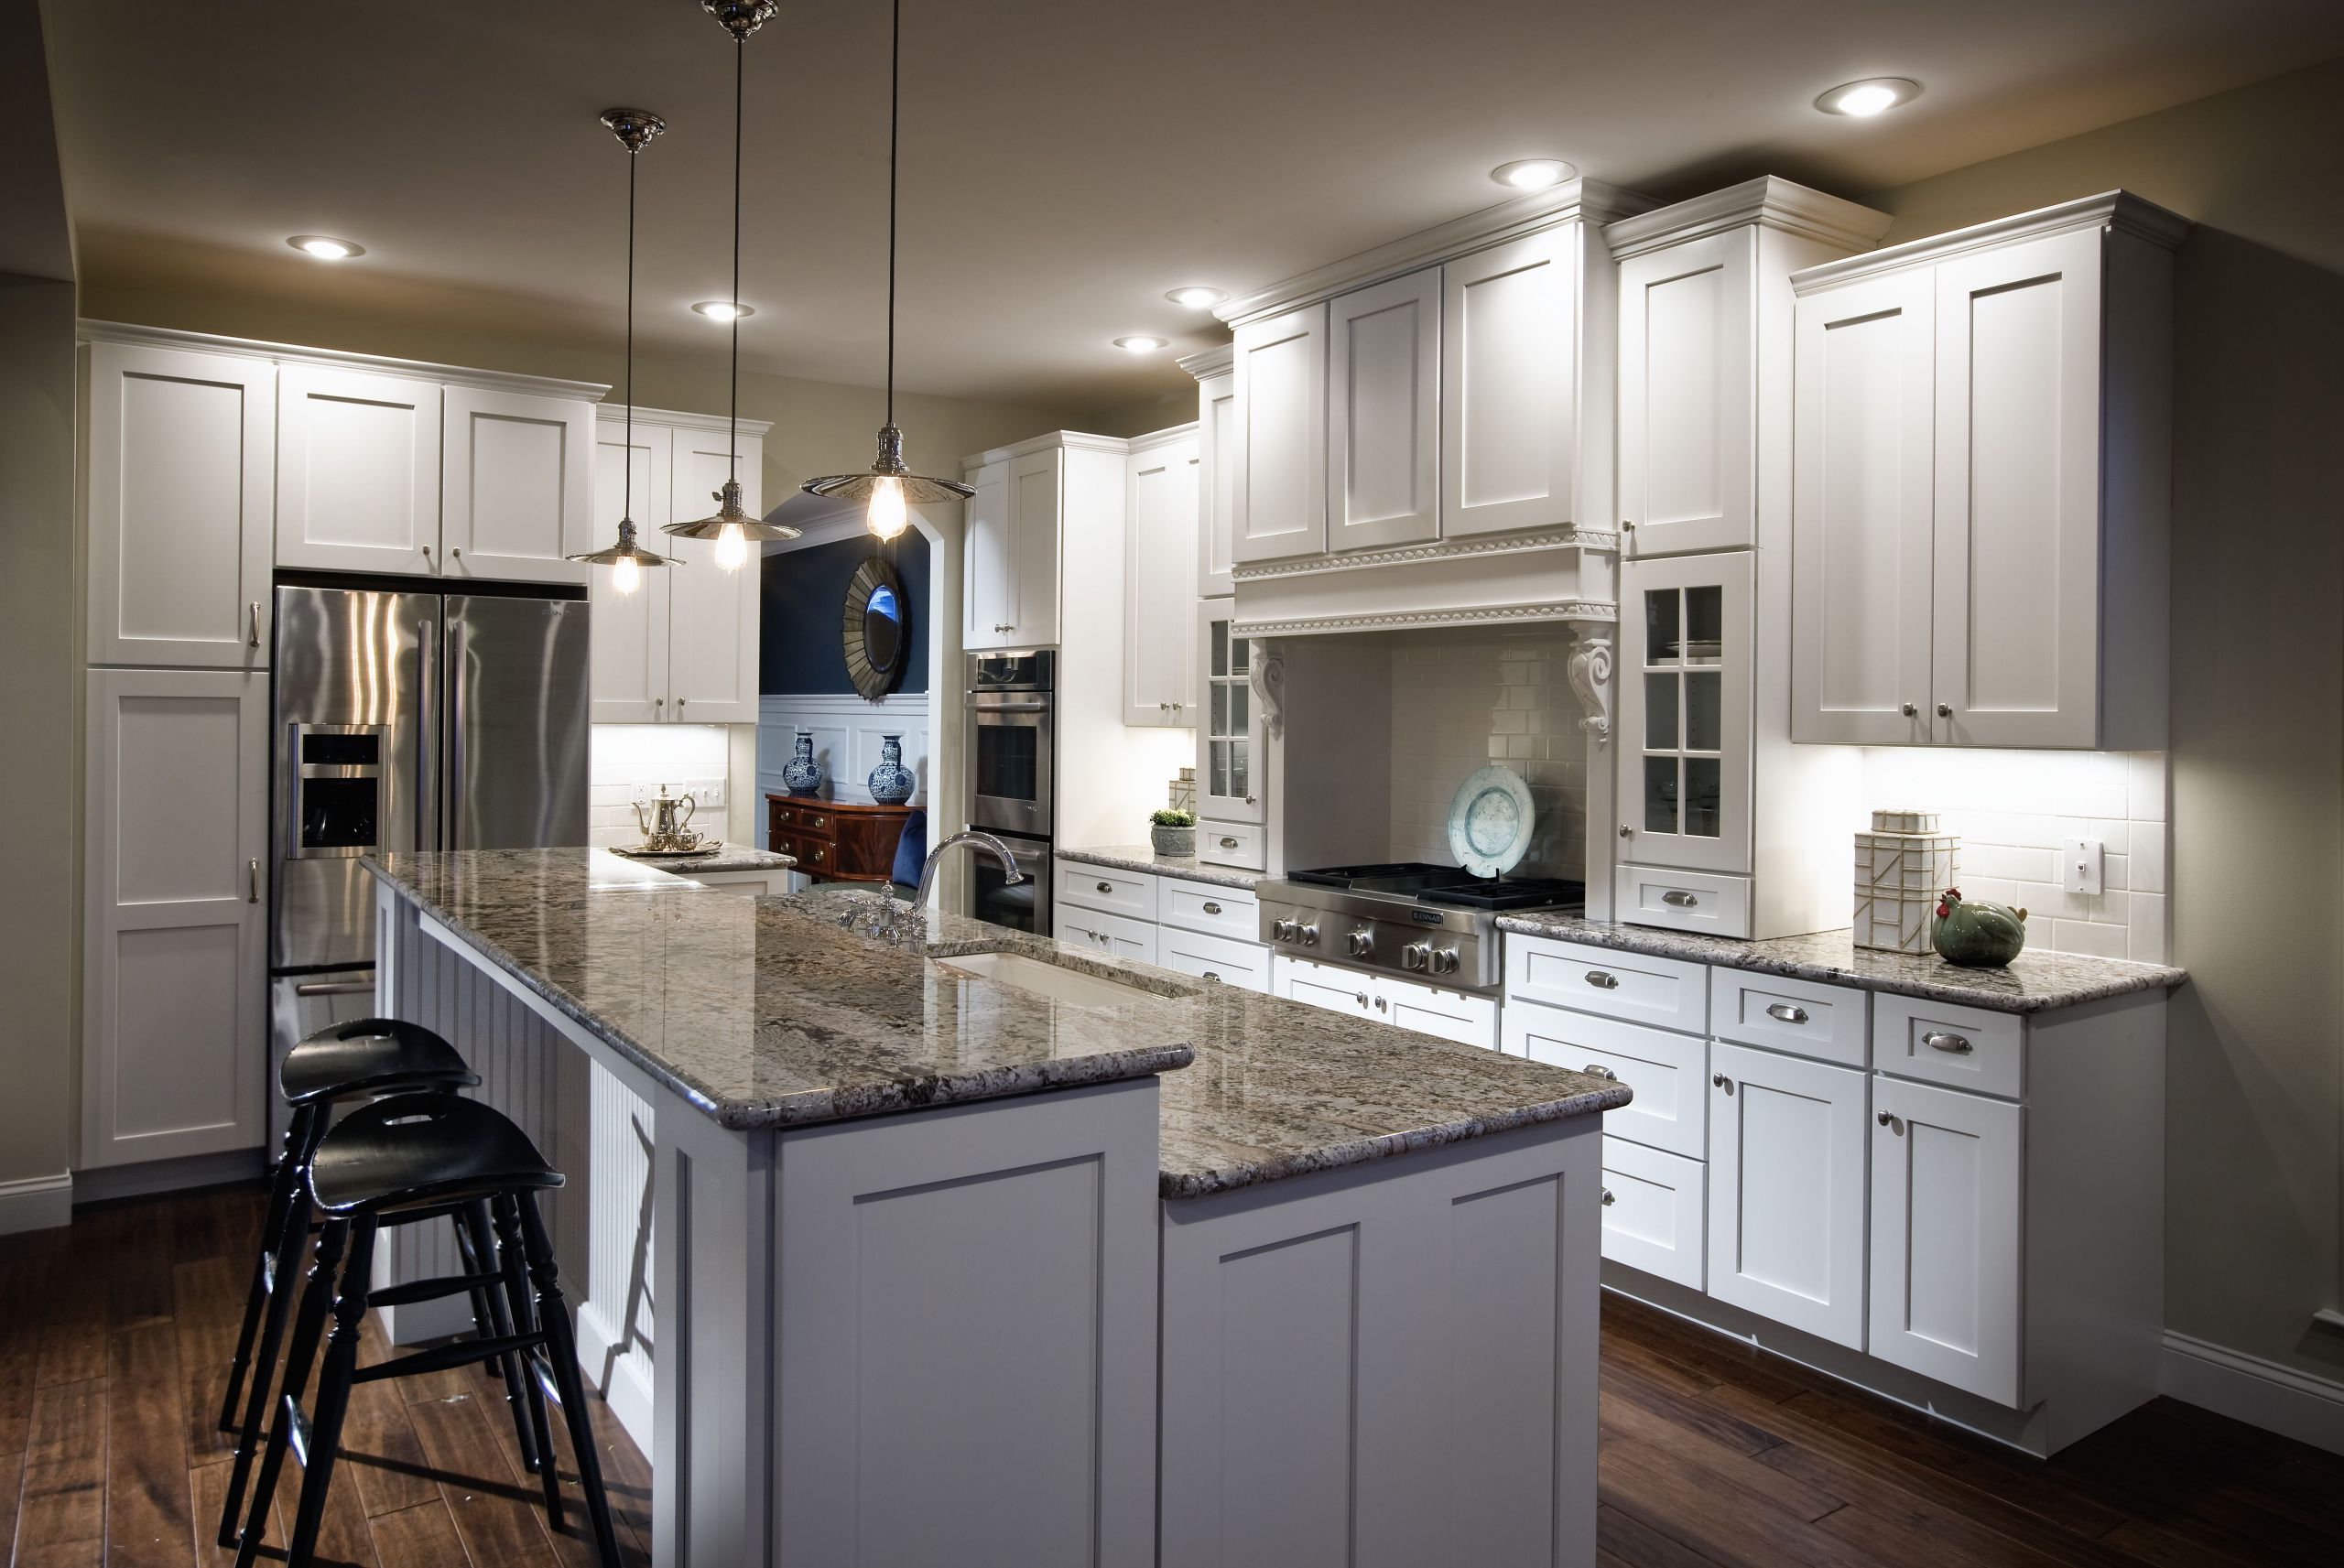 Kitchen Cabinets And Islands
 Some Tips for Custom Kitchen Island Ideas MidCityEast